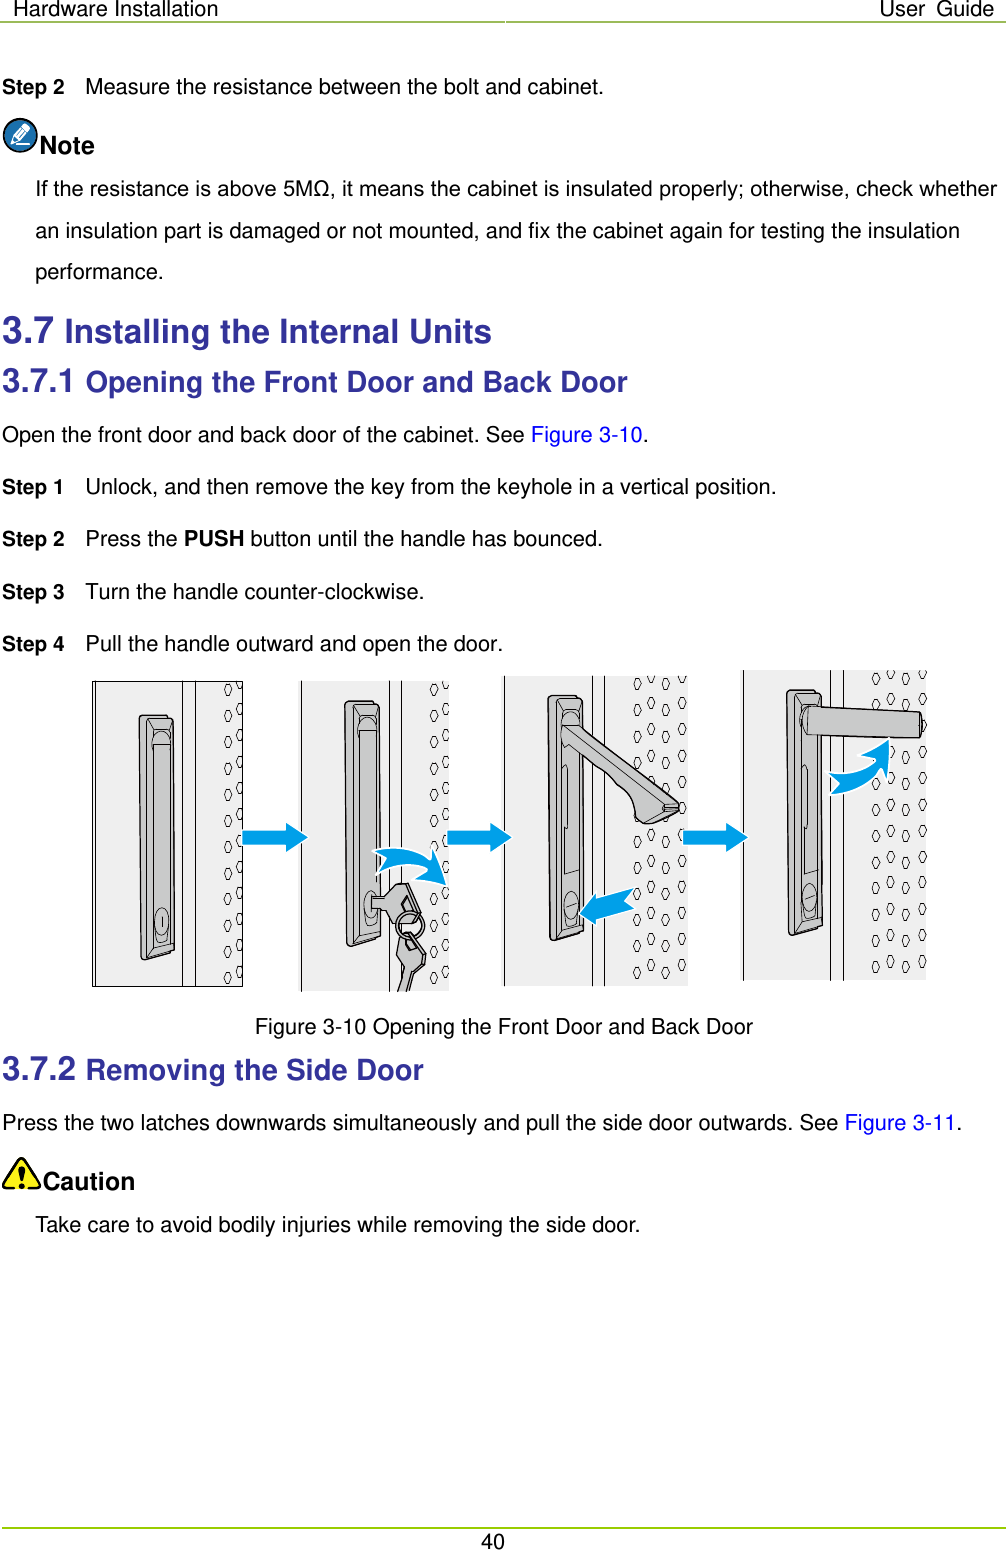 Hardware Installation User Guide  40  Step 2 Measure the resistance between the bolt and cabinet.   Note If the resistance is above 5MΩ, it means the cabinet is insulated properly; otherwise, check whether an insulation part is damaged or not mounted, and fix the cabinet again for testing the insulation performance. 3.7 Installing the Internal Units 3.7.1 Opening the Front Door and Back Door Open the front door and back door of the cabinet. See Figure 3-10. Step 1 Unlock, and then remove the key from the keyhole in a vertical position. Step 2 Press the PUSH button until the handle has bounced. Step 3 Turn the handle counter-clockwise.   Step 4 Pull the handle outward and open the door.     Figure 3-10 Opening the Front Door and Back Door 3.7.2 Removing the Side Door Press the two latches downwards simultaneously and pull the side door outwards. See Figure 3-11. Caution Take care to avoid bodily injuries while removing the side door. 